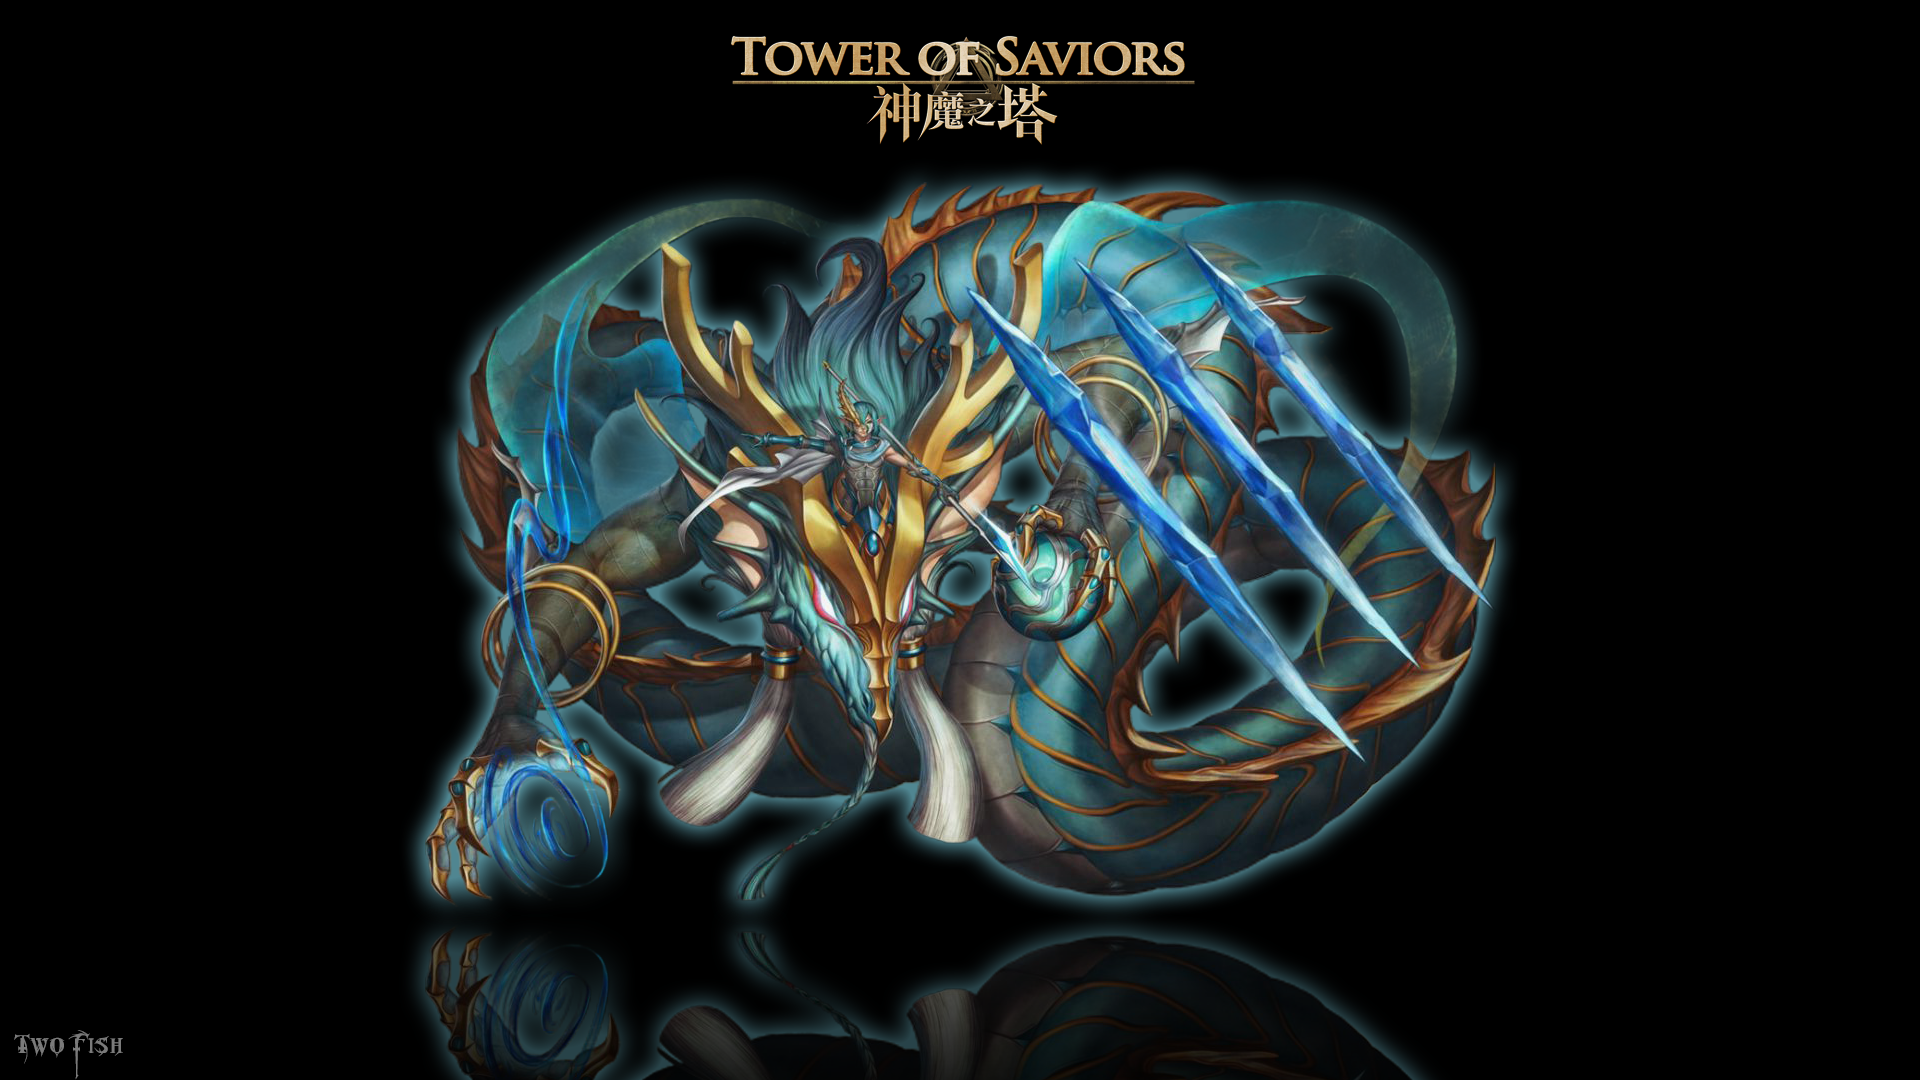 General 1920x1080 dragon Tower of Saviors anime black background simple background fantasy art reflection